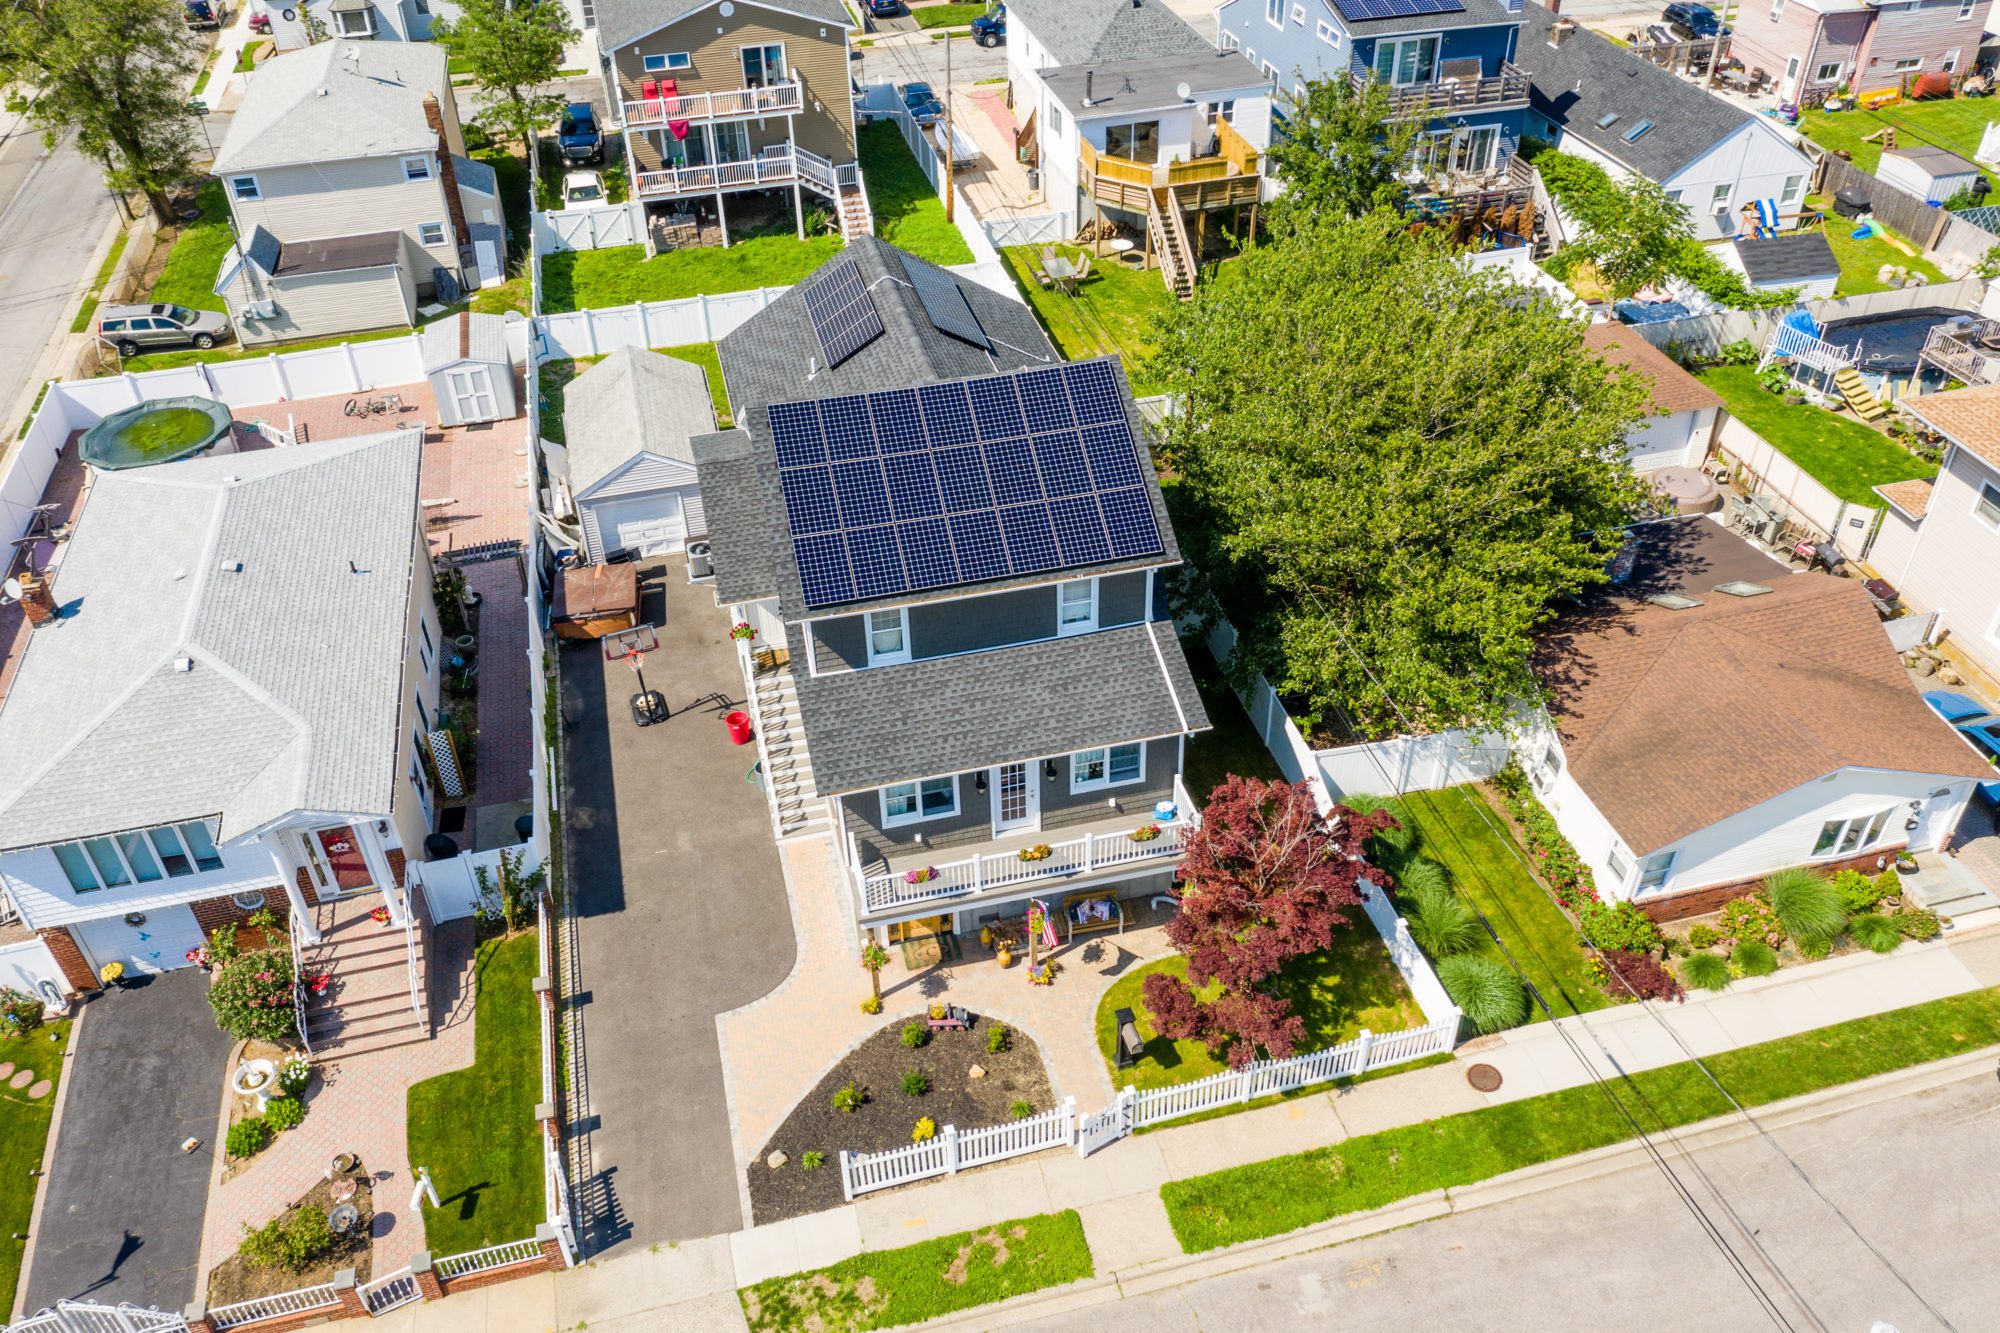 A house on Long Island has solar panels attached to the roof.